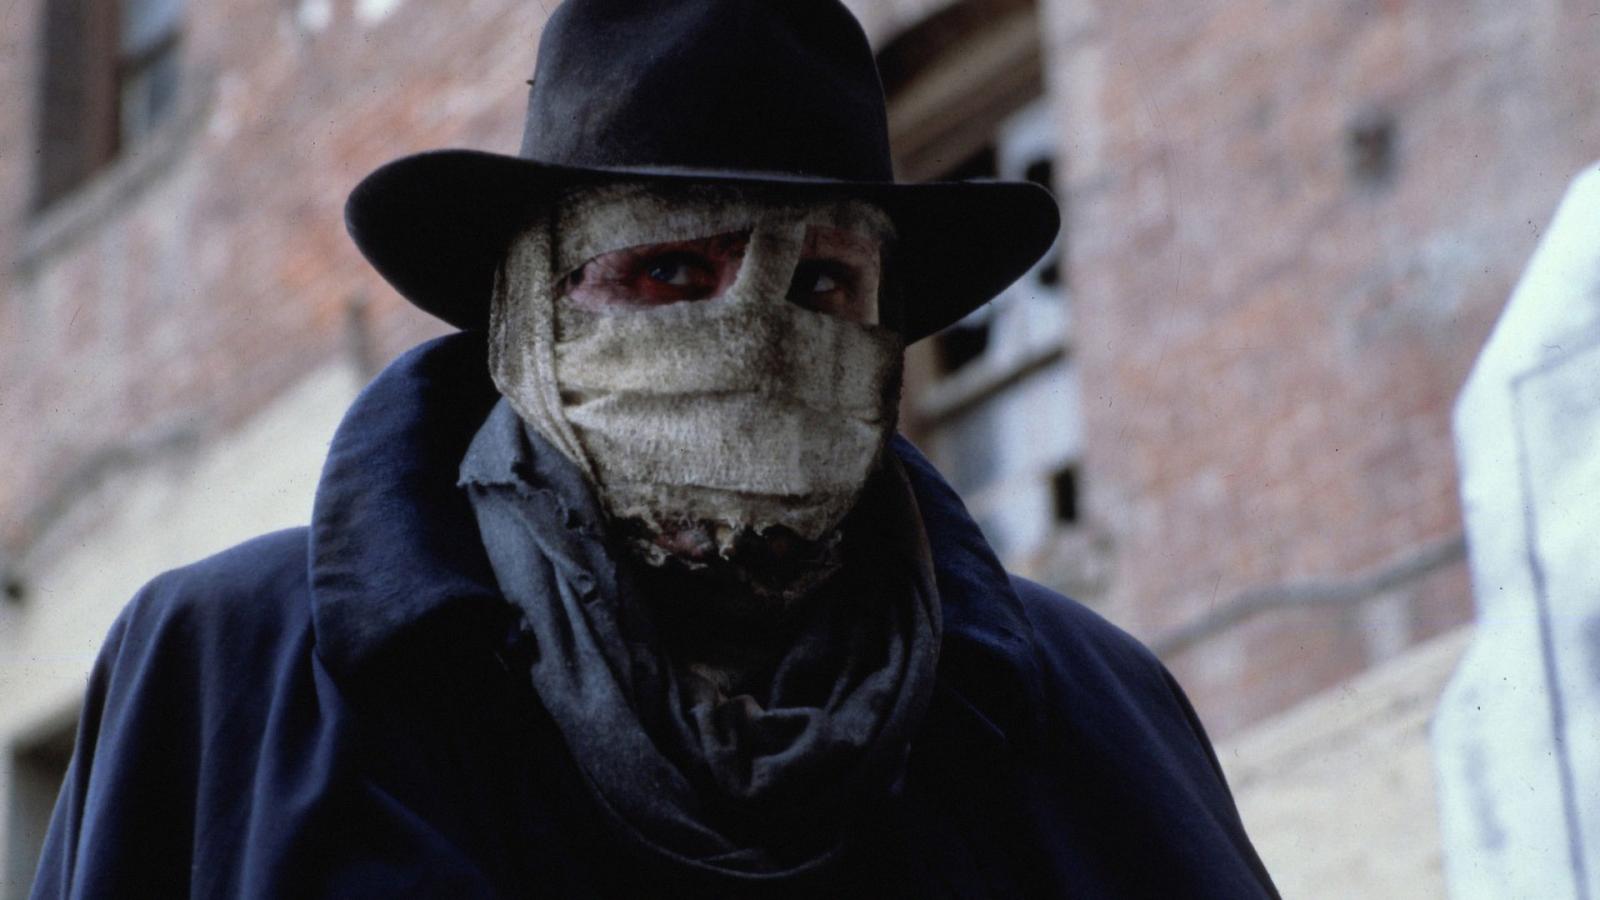 Forget Marvel, Sam Raimi Reinvented Horror: A Cliché-Free Guide to His 8 Films - image 3